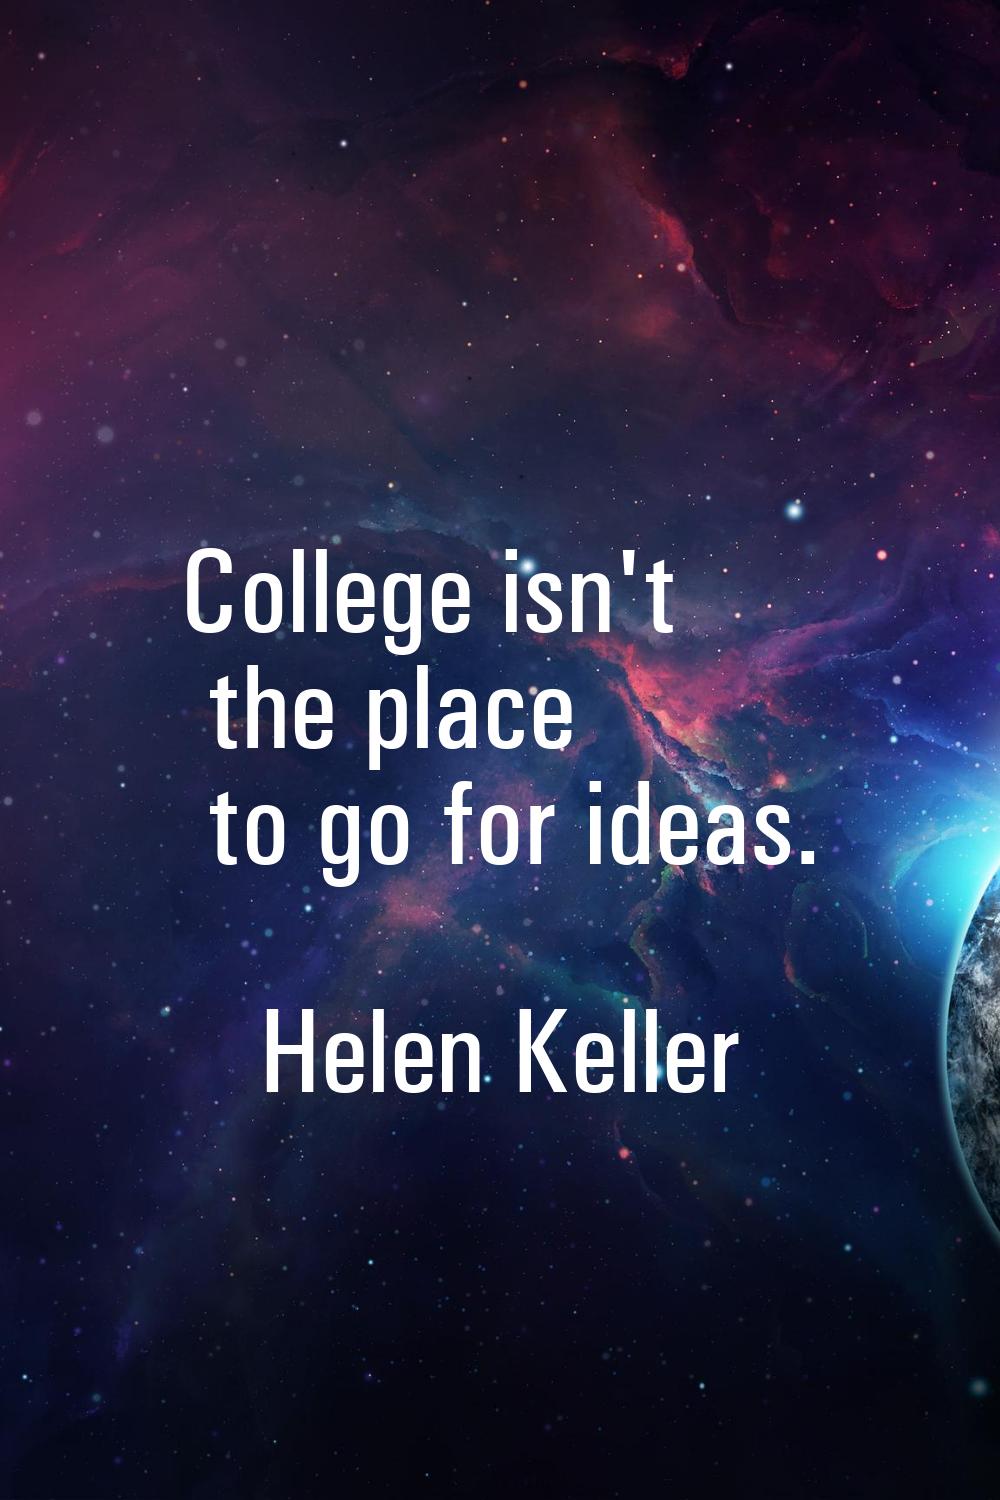 College isn't the place to go for ideas.